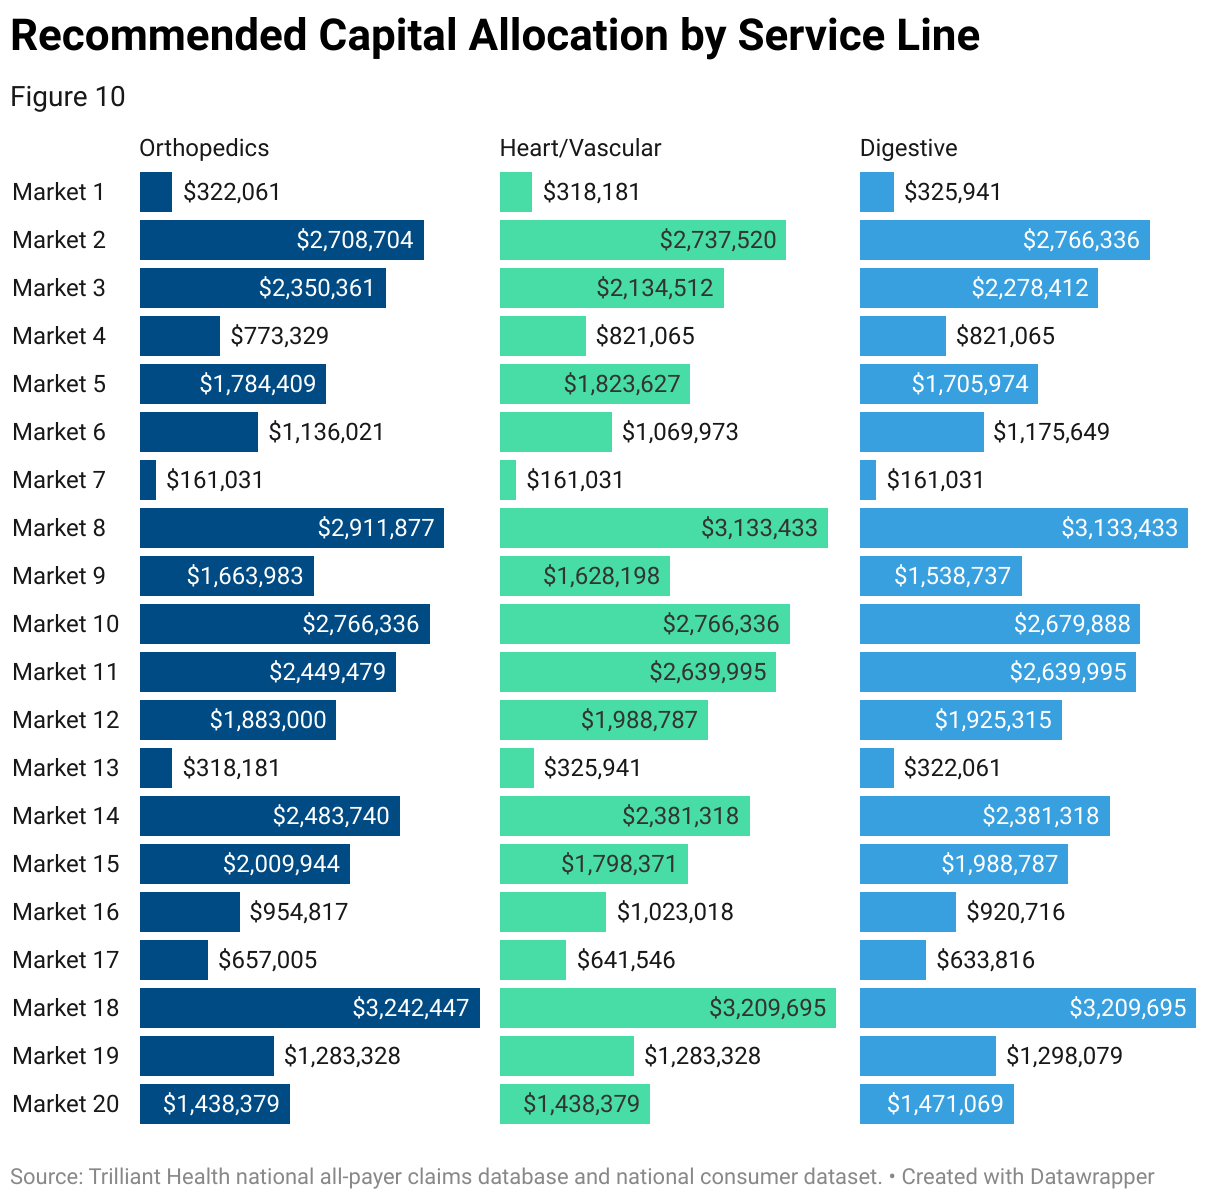 A bar chart that shows the recommended capital allocation for the orthopedics, heart/vascular and digestive service lines across 20 markets.